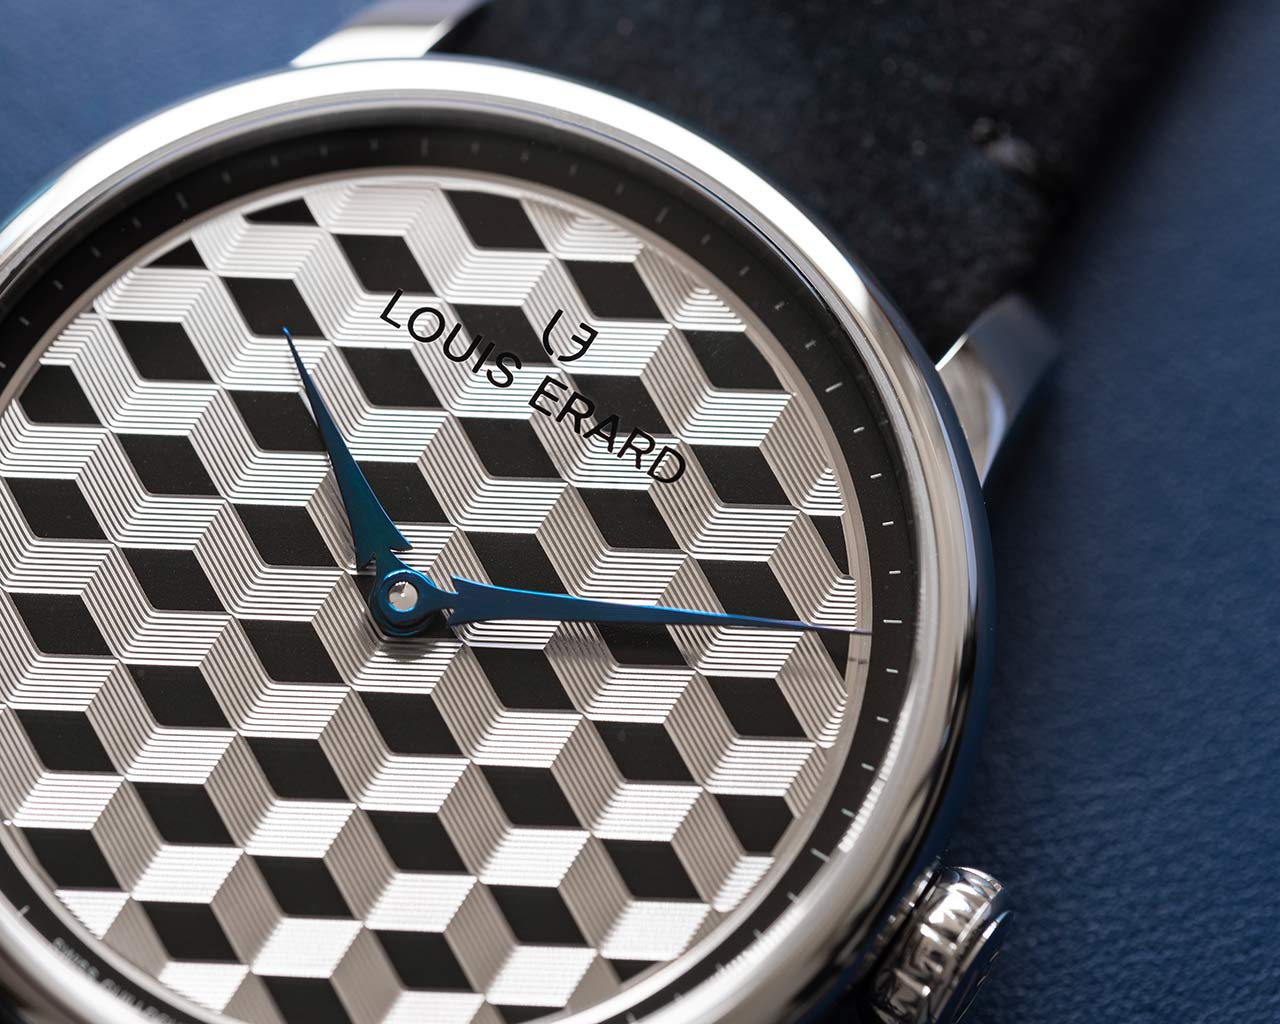 Unboxing Louis Erard Excellence Guilloche Main, a collab with M.C. Escher?  